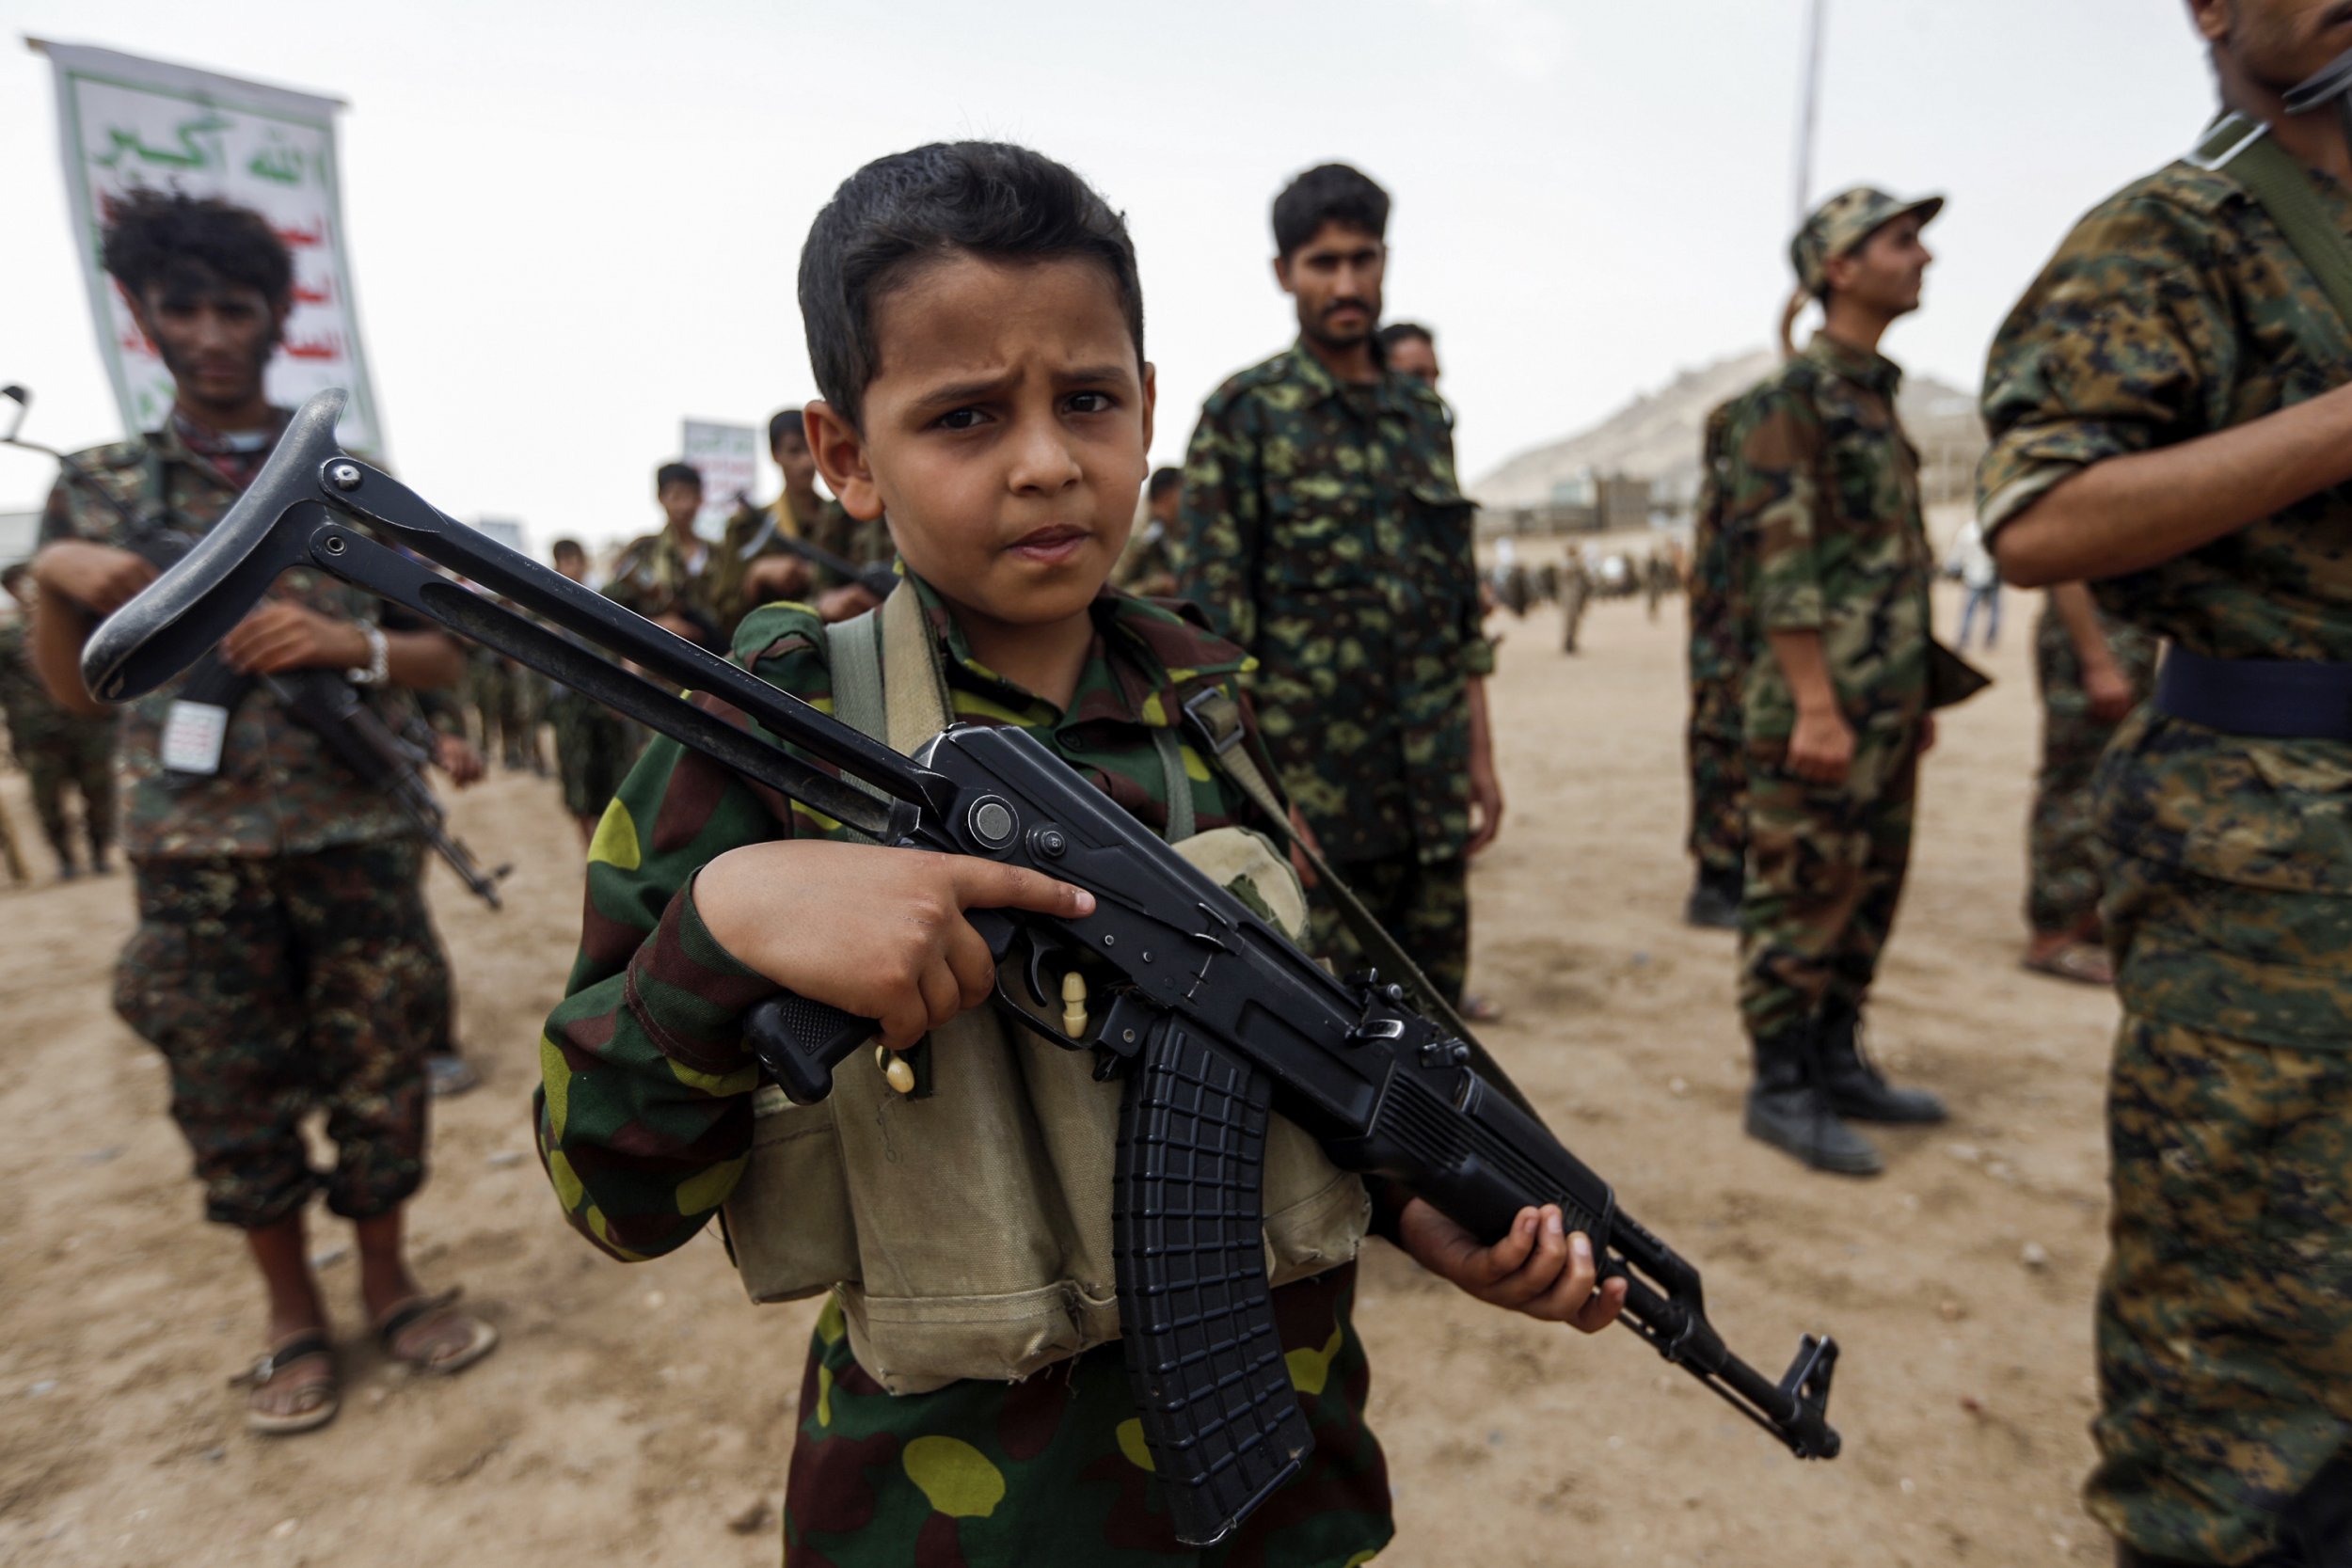 which country is currently chairing working group on children and armed conflict